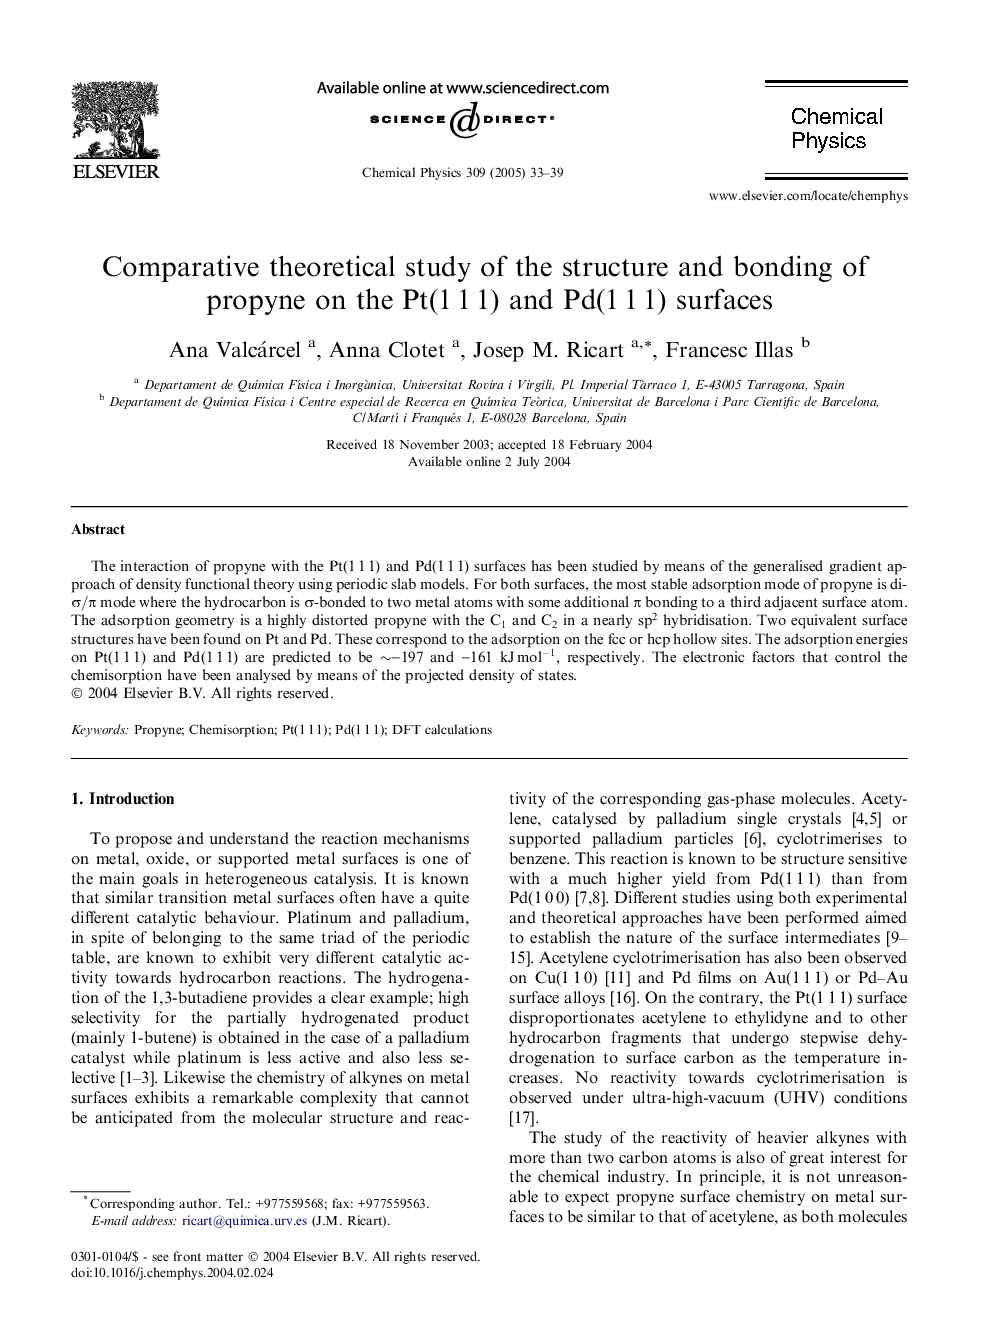 Comparative theoretical study of the structure and bonding of propyne on the Pt(1Â 1Â 1) and Pd(1Â 1Â 1) surfaces